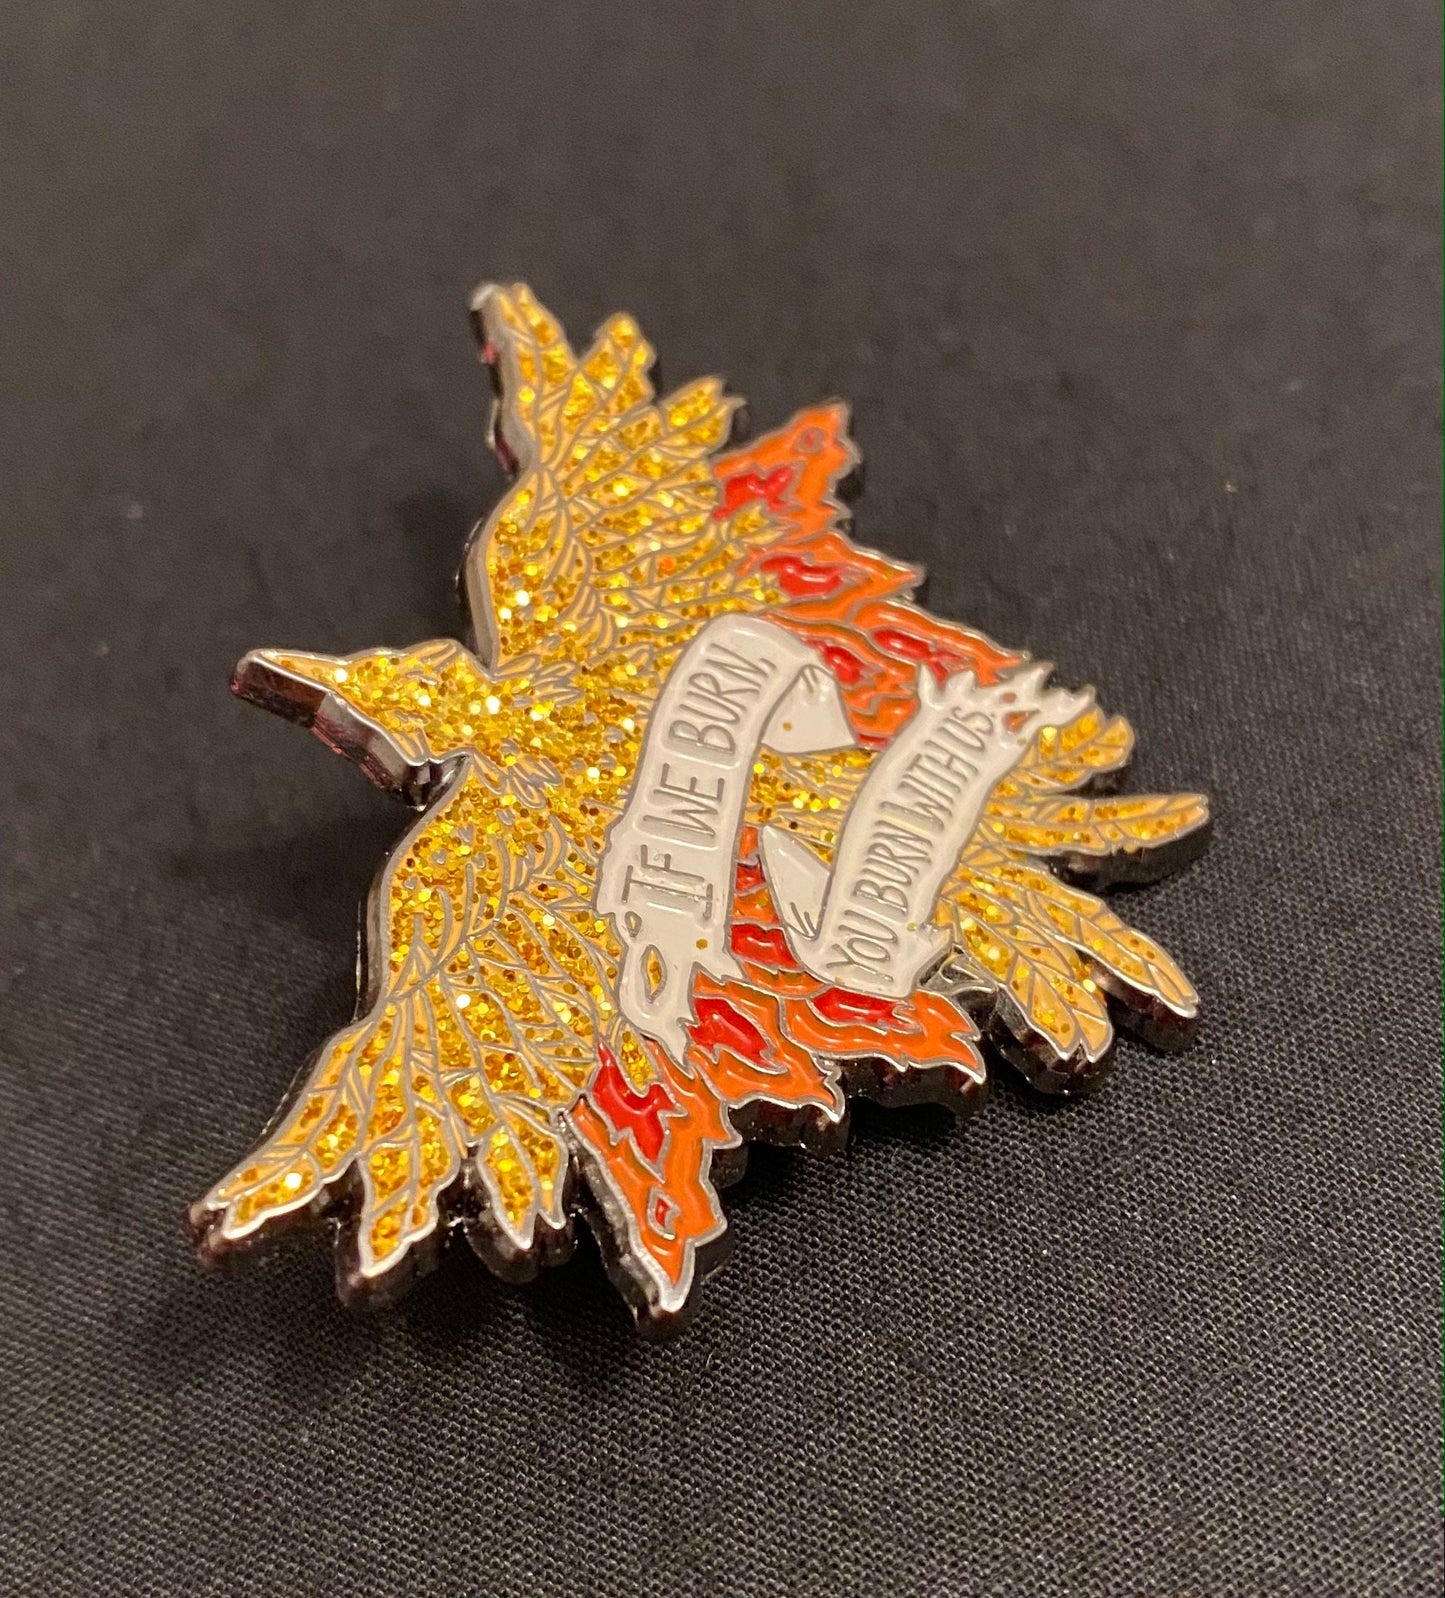 Discontinued HG Inspired If We Burn, You Burn With Us Girl on Fire Enamel Pin